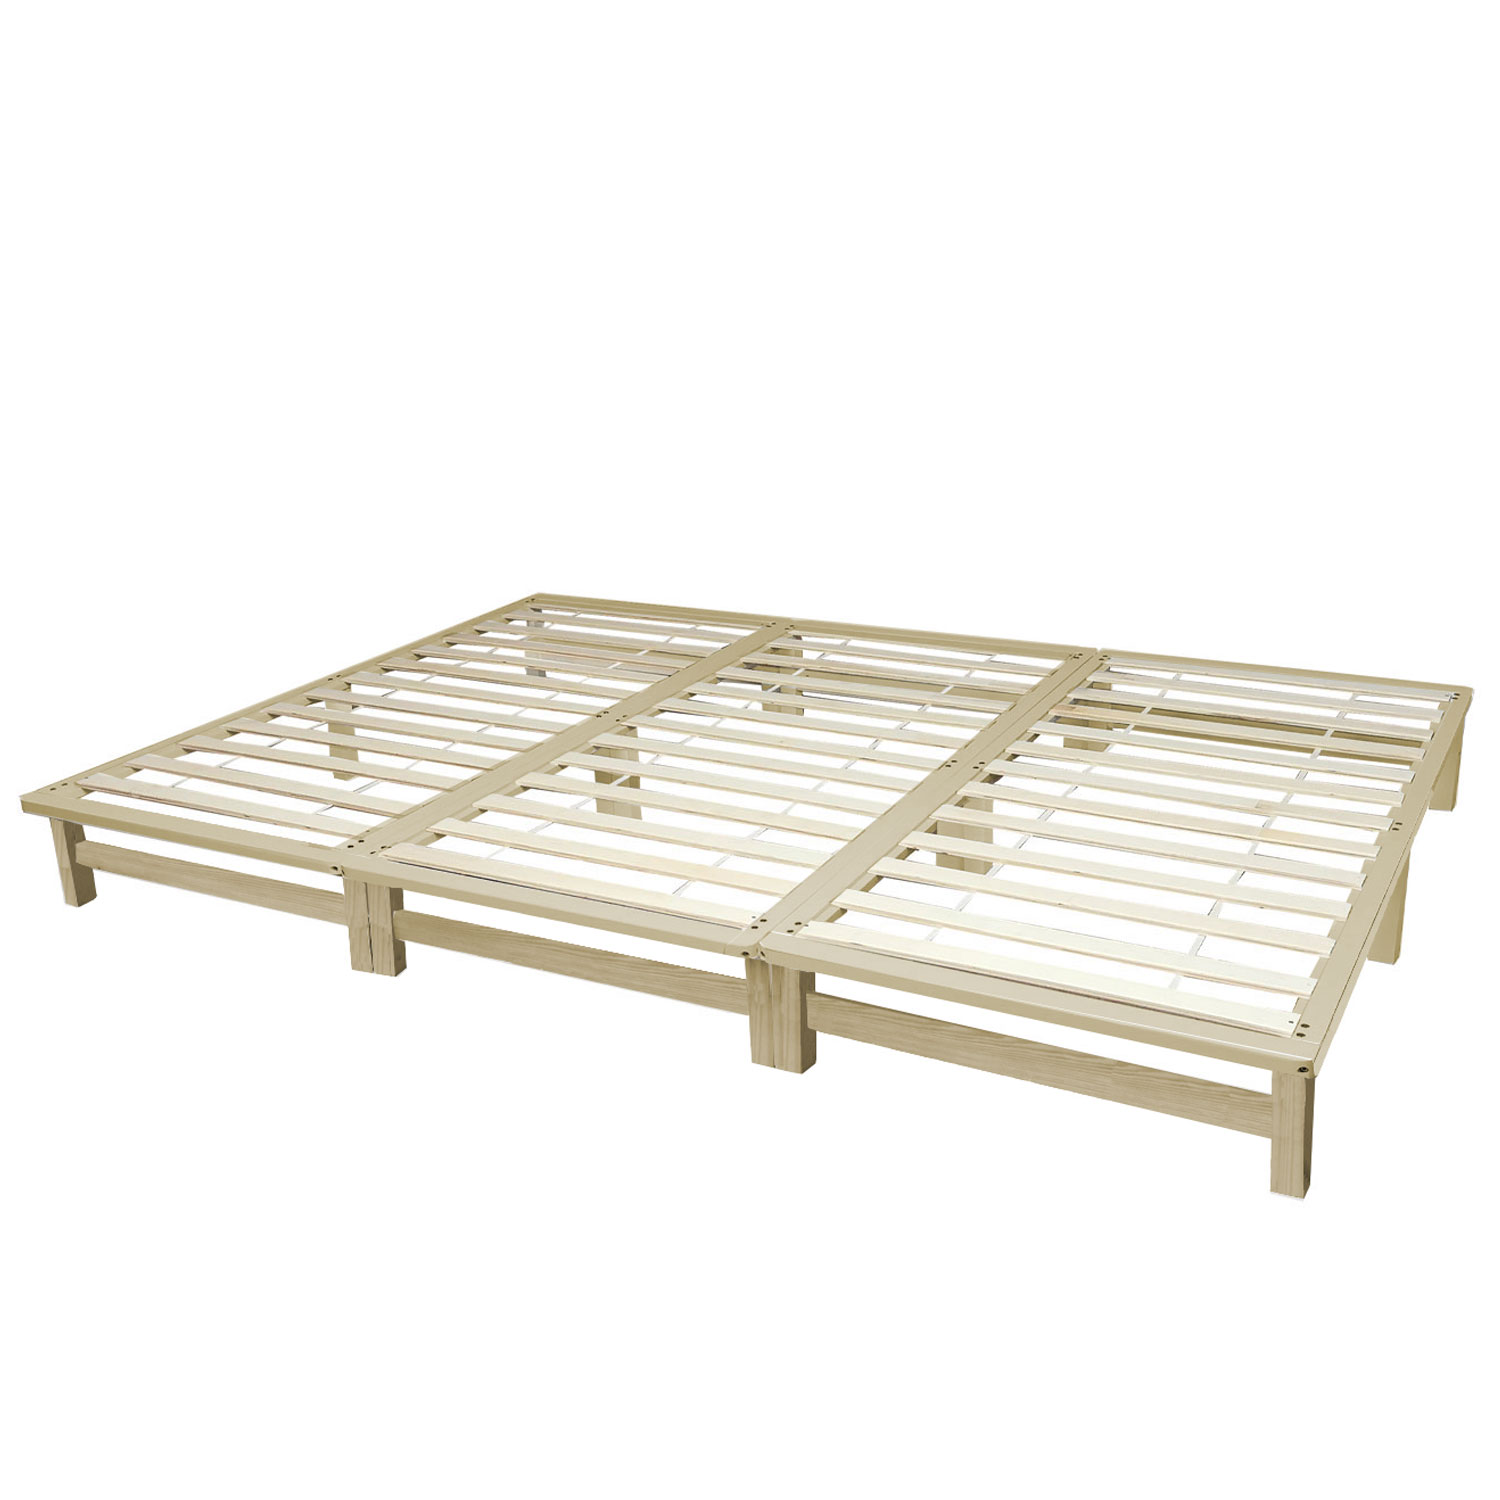 Family bed wooden bed 270x200 cm Natural White Grey pallet bed Solid Frame Futon bed